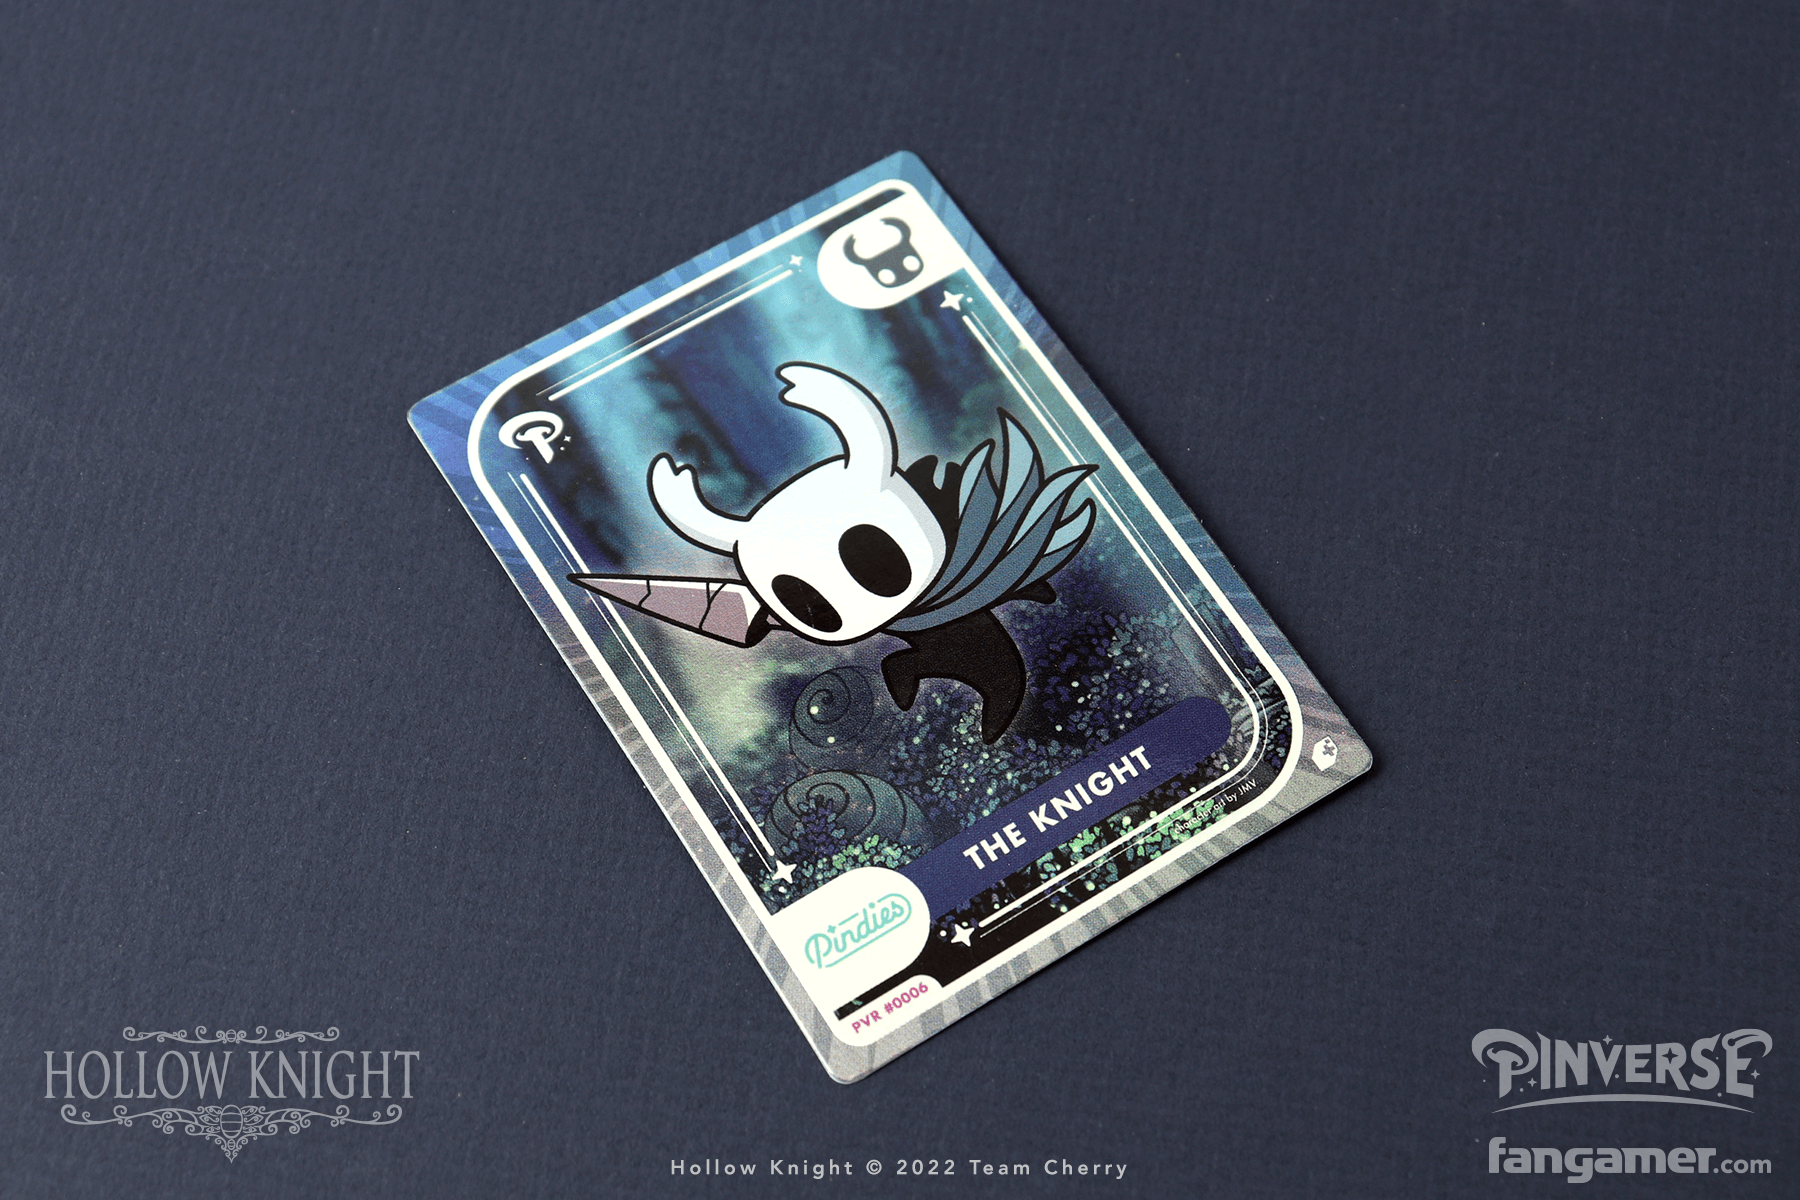 Authentic Replacement Original Case ONLY for HOLLOW KNIGHT